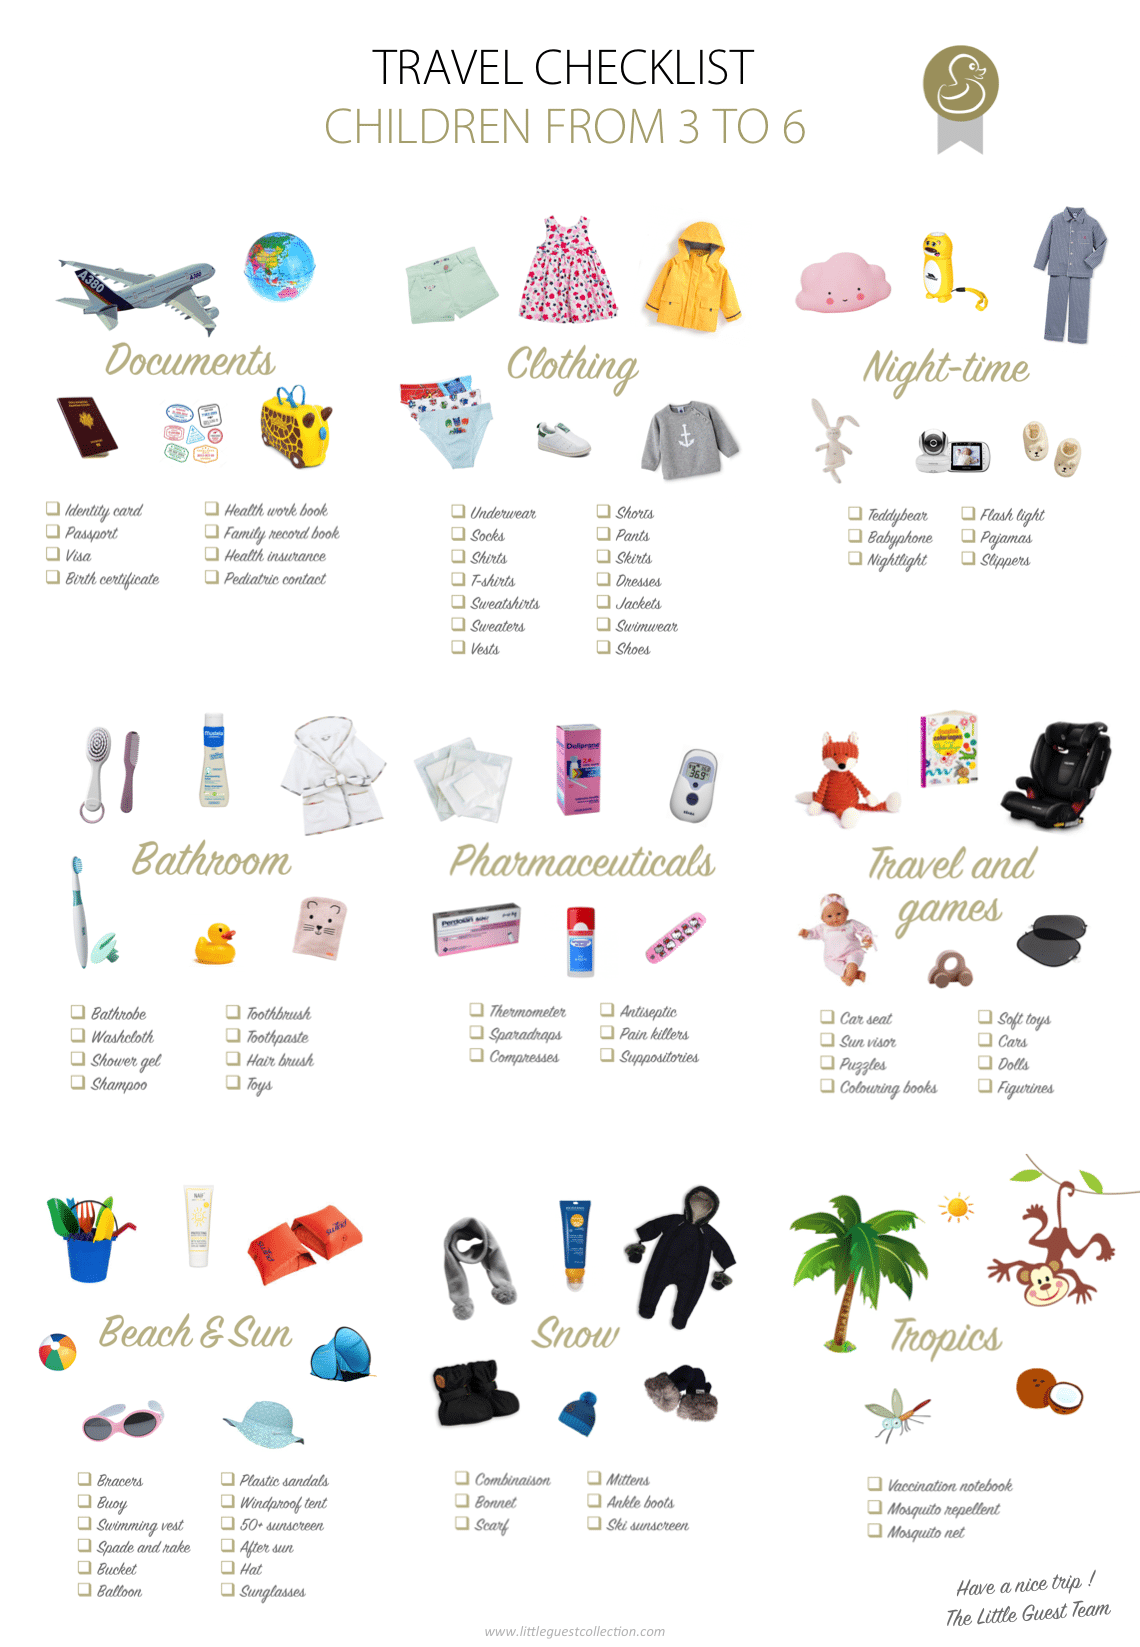 Travel checklist for children from 3 years, 4 years, 5 years and 6 years (documents, clothing, night-time, bathroom, meals, pharmaceuticals, travel, games, sun, beach, tropics et snow)